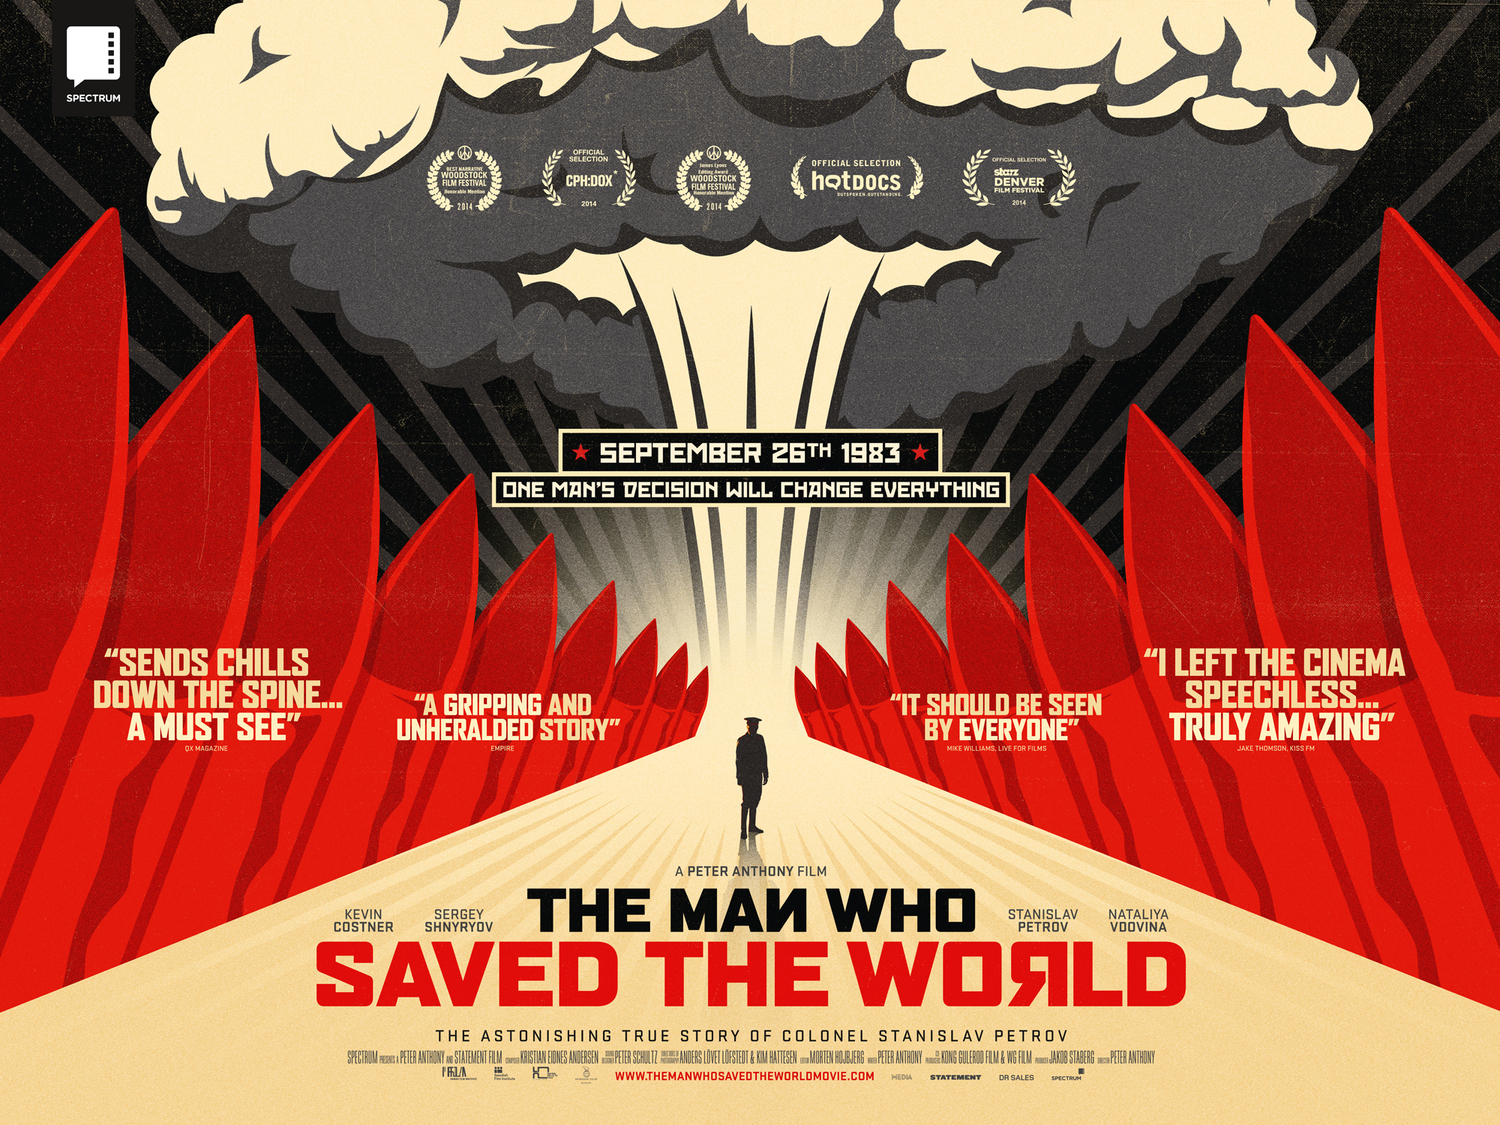 The Man Who Saved the World